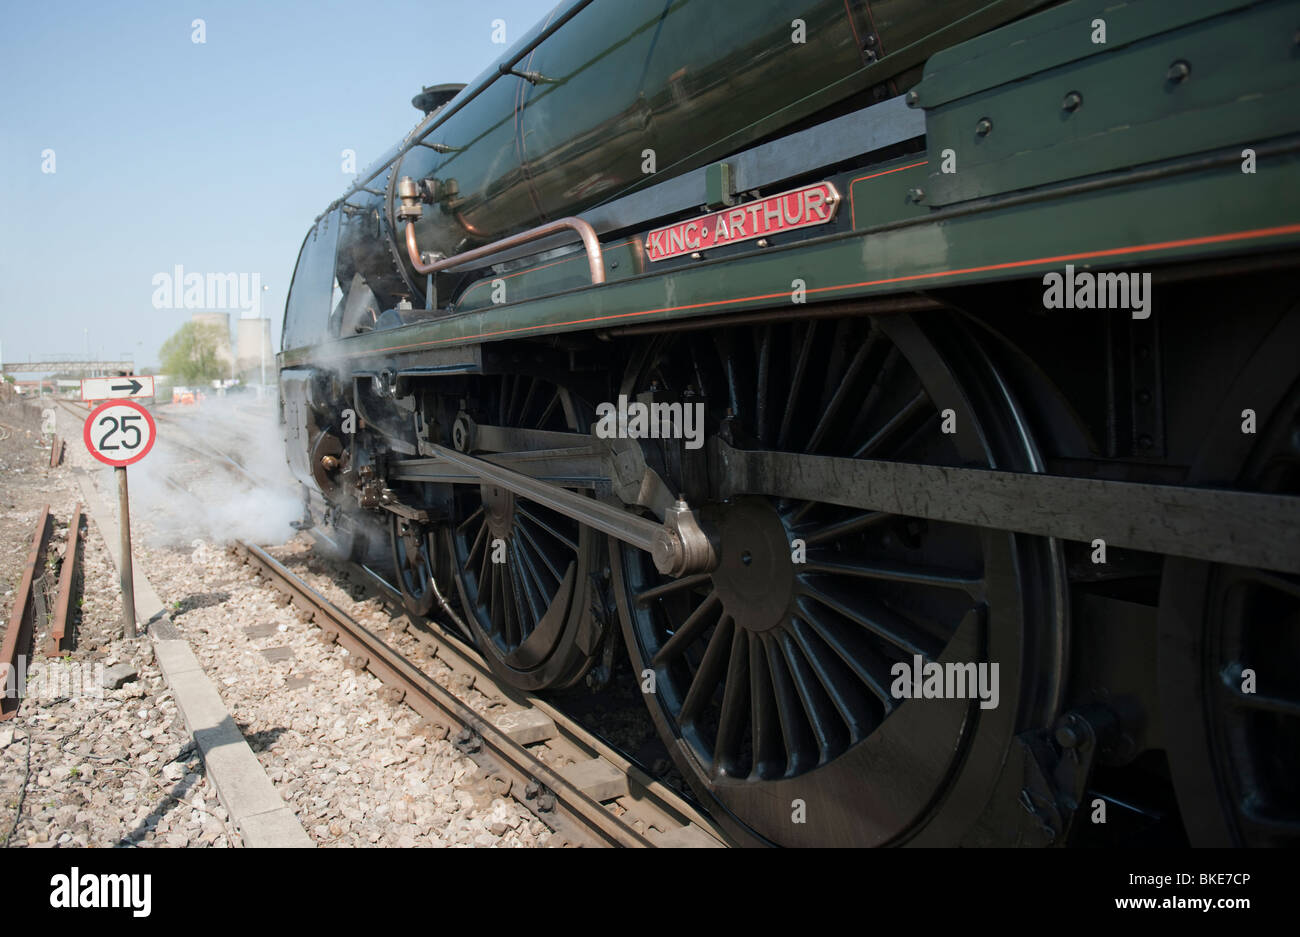 Southern Railway King Arthur Class Locomotive at Didcot Parkway Station with Excursion Train UK -1 Stock Photo